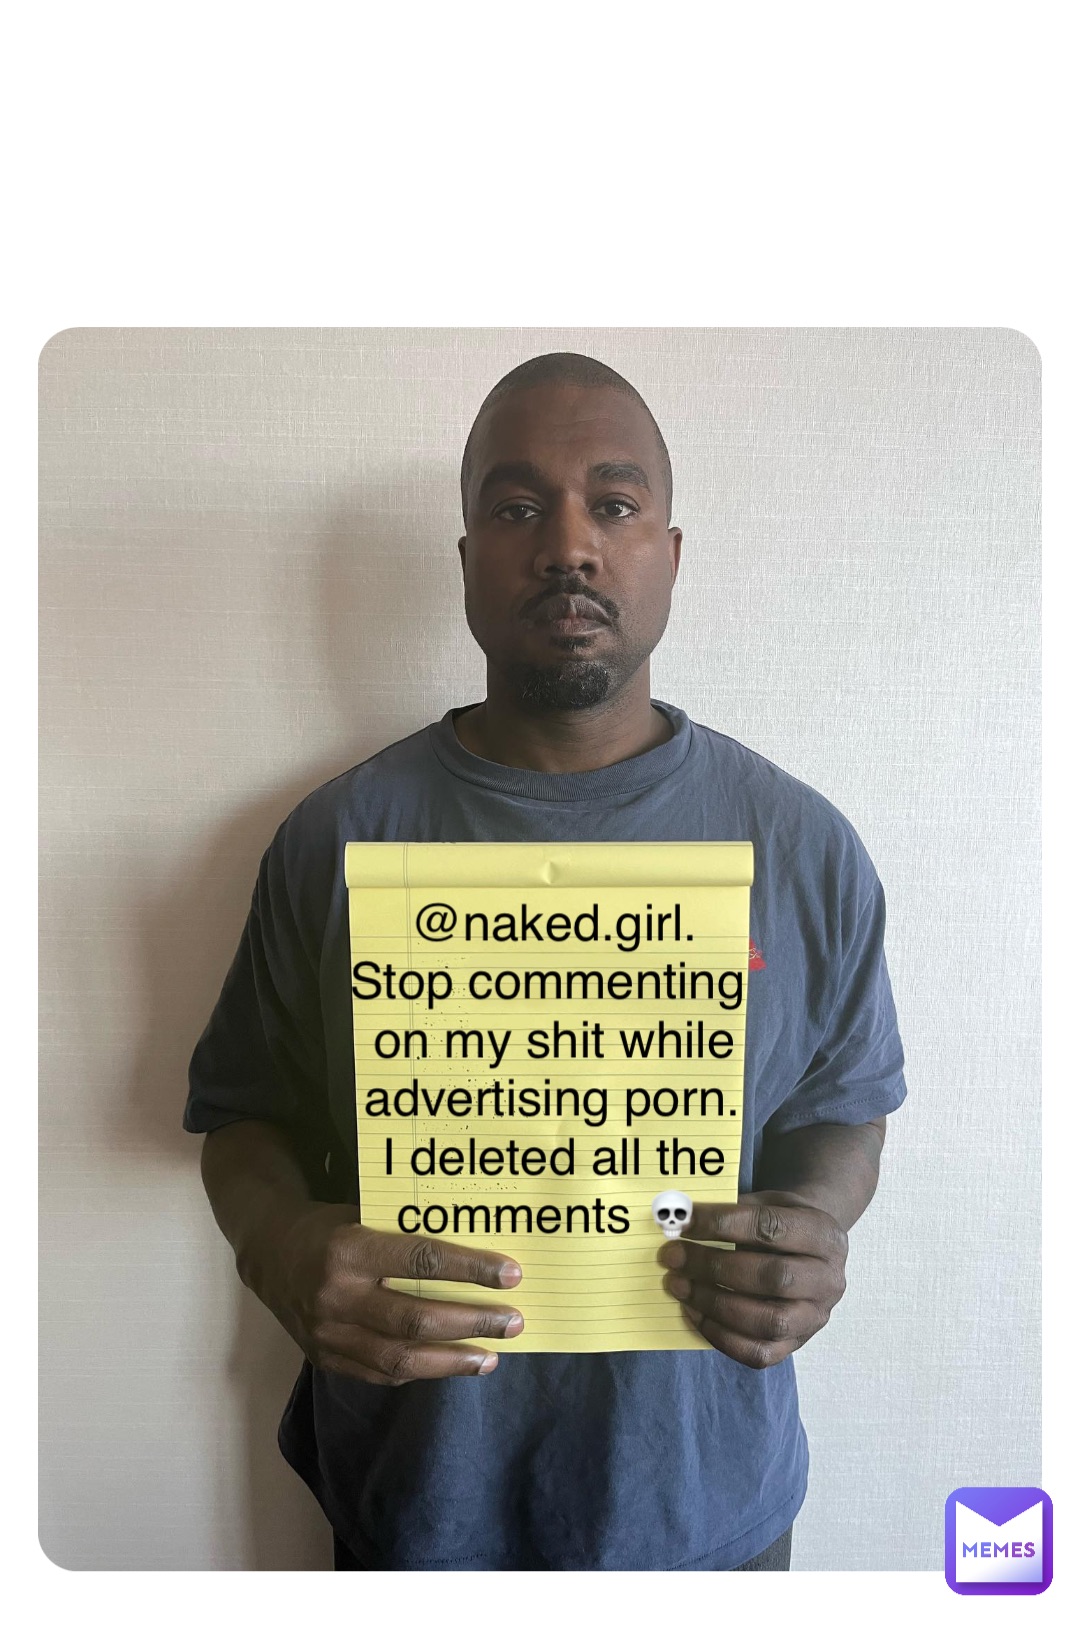 @naked.girl. Stop commenting on my shit while advertising porn. I deleted all the comments 💀